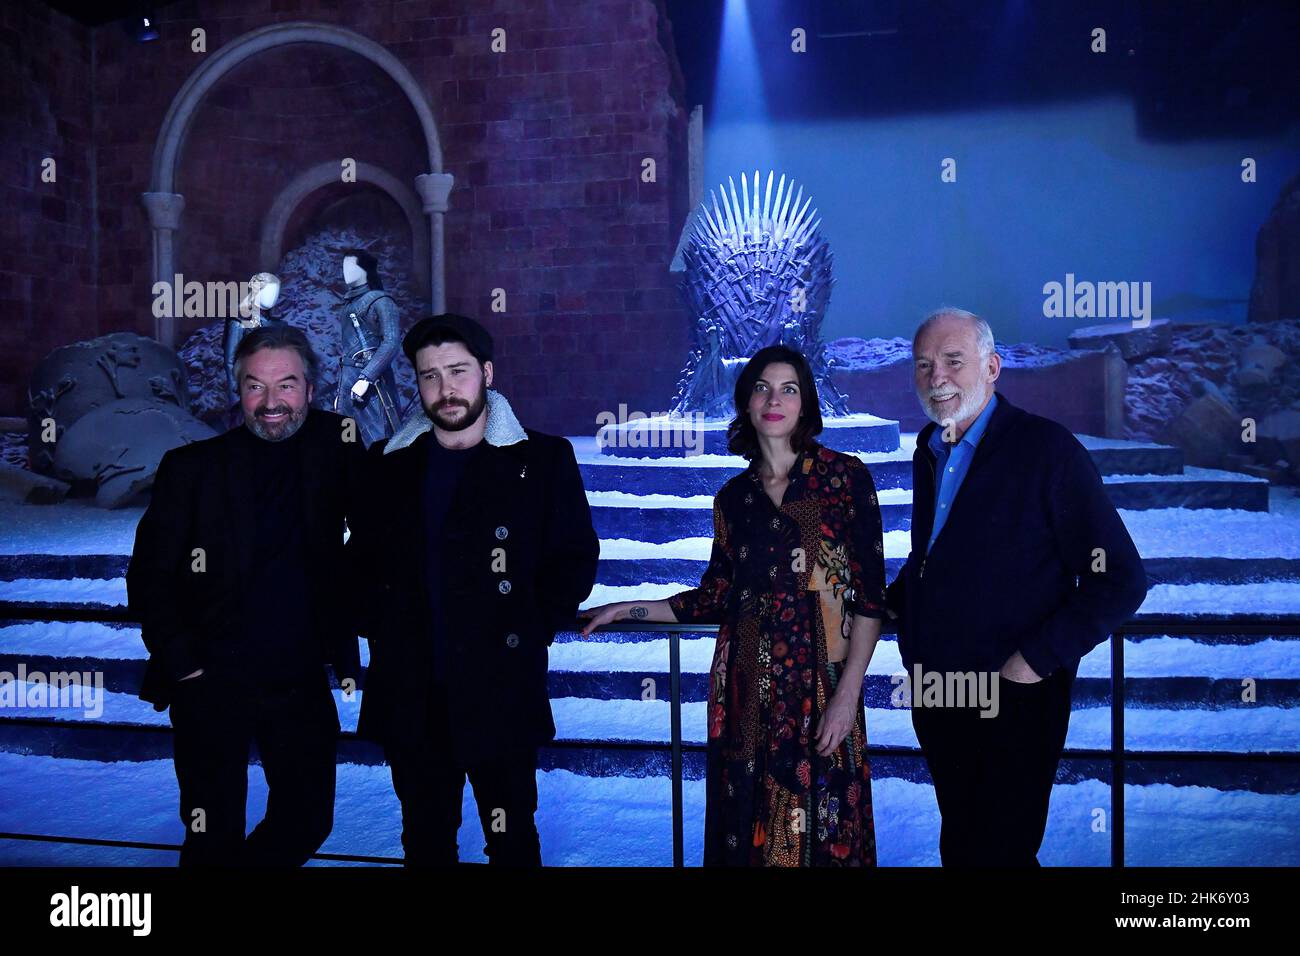 Actors from the TV show Game of Thrones: Ian Beattie who plays Meryn Trant, Daniel Portman who plays Podrick Payne, Natalia Tena who plays Osha and Ian McElhinney who plays Barristan Selmy, pose for a photograph in front of the throne in the 'The Destroyed Throne Room' set during the media preview day for the opening of the new Game of Thrones studio tour at Linen Mill Studios in Banbridge, Northern Ireland, February 2, 2022. REUTERS/Clodagh Kilcoyne Stock Photo